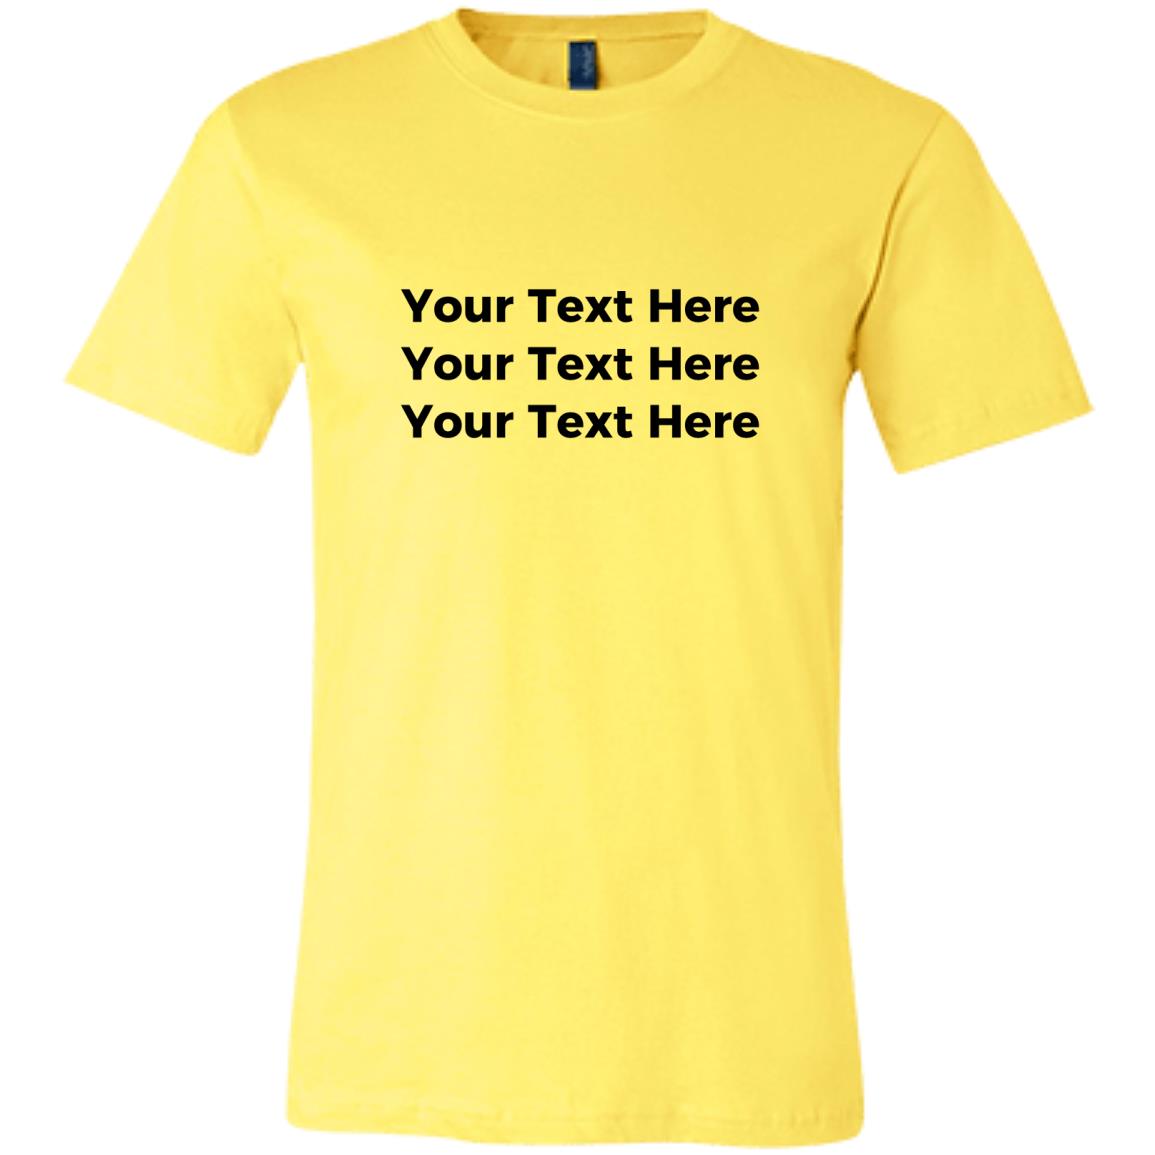 PERSONALIZED BLANK T-SHIRT